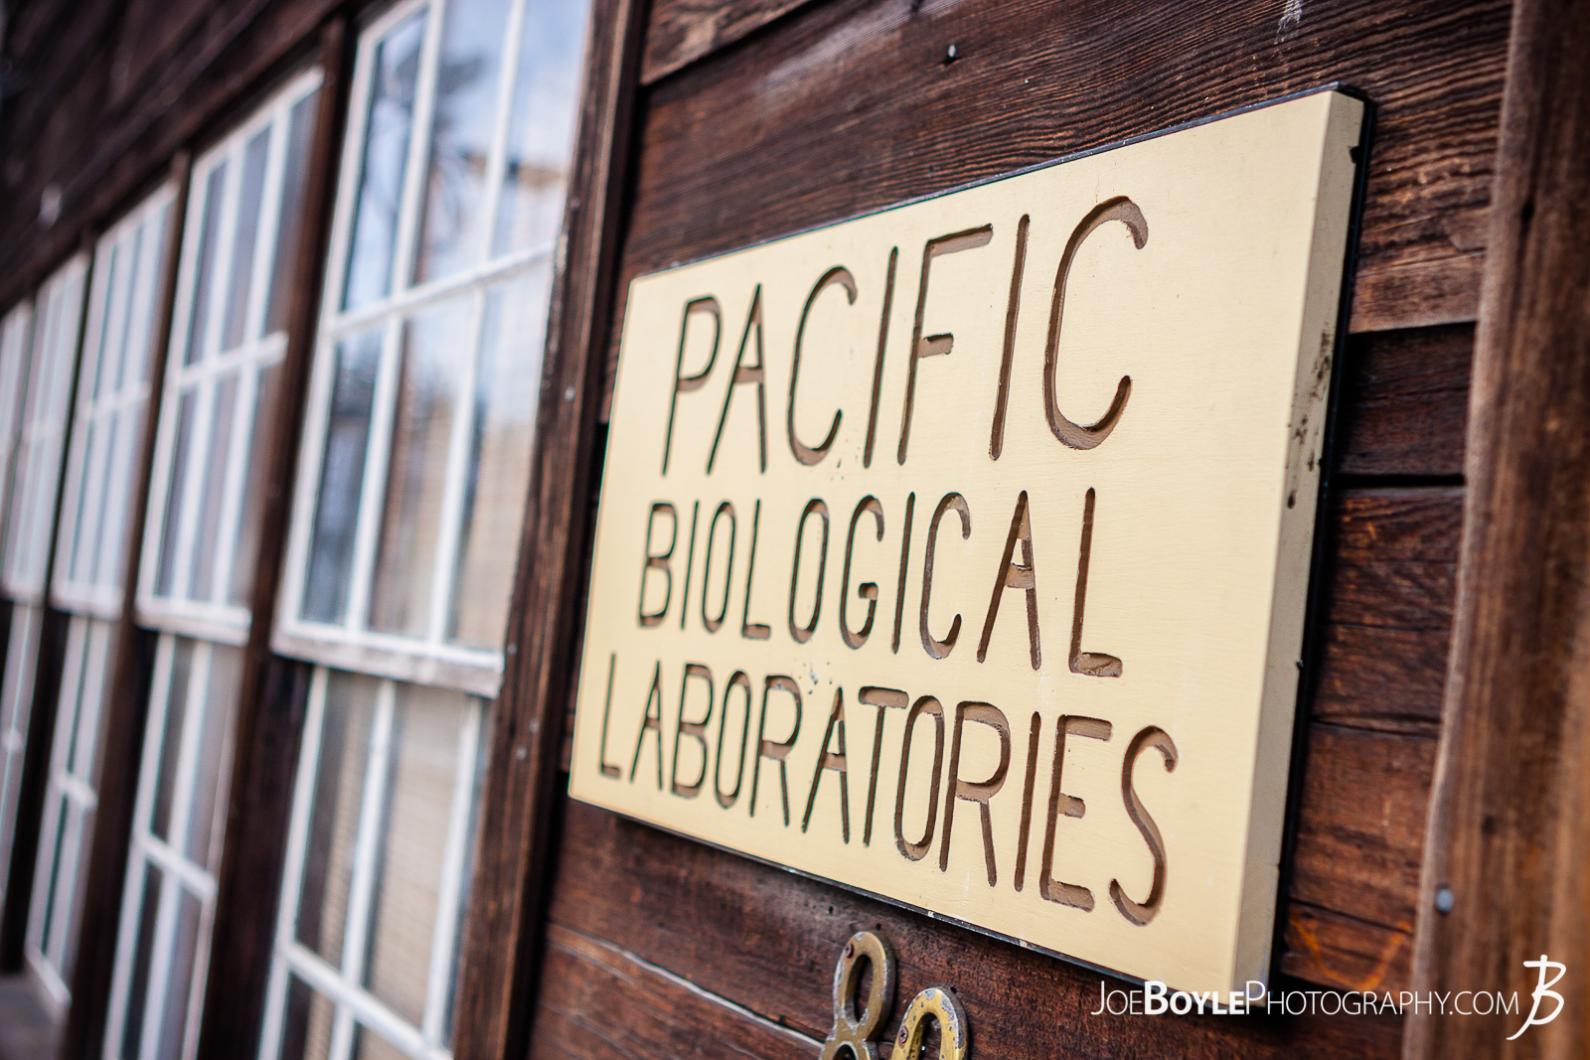 I was visiting Monterey and had to spend some time down Cannery Row. Here is a photo of the sign on the Pacific Biological Laboratories building.